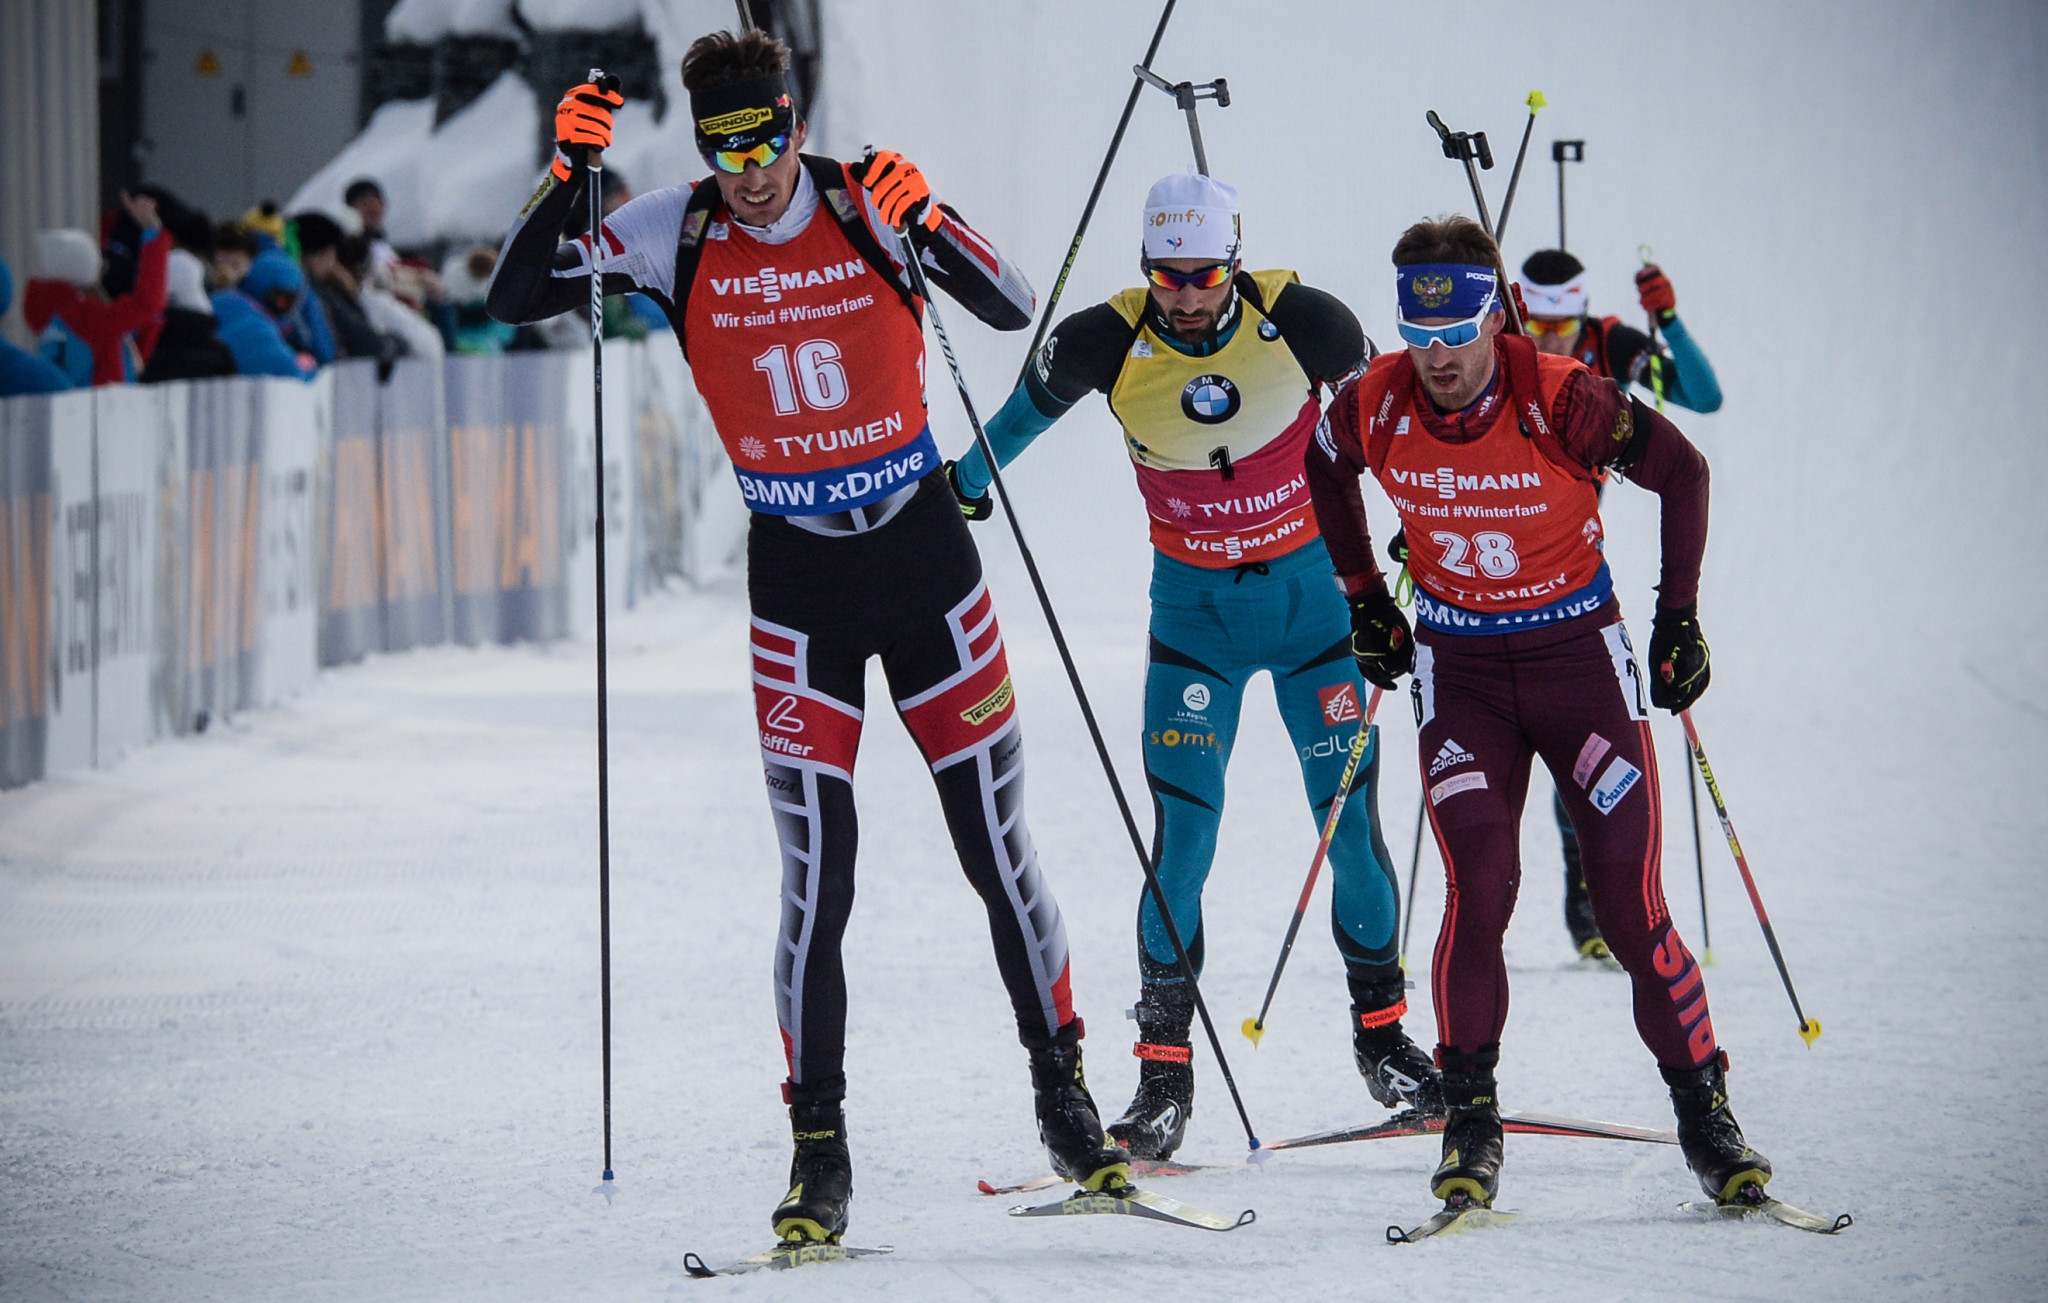 The International Biathlon Union pledged to carry out a full review of its constitution ©Getty Images